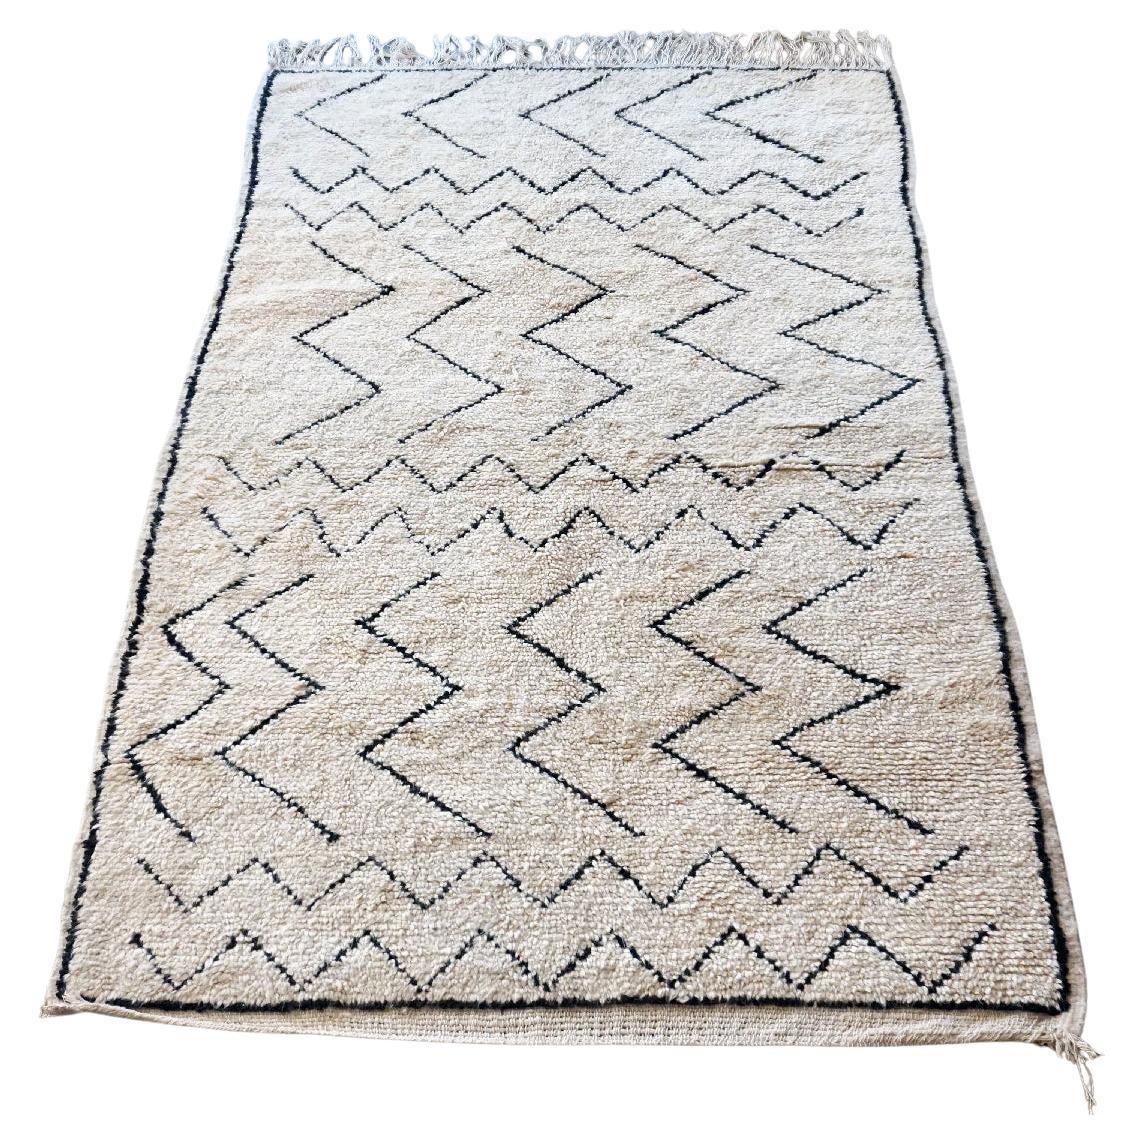 Creme white and black Vintage Moroccan Handwoven Wool Berber Rug For Sale